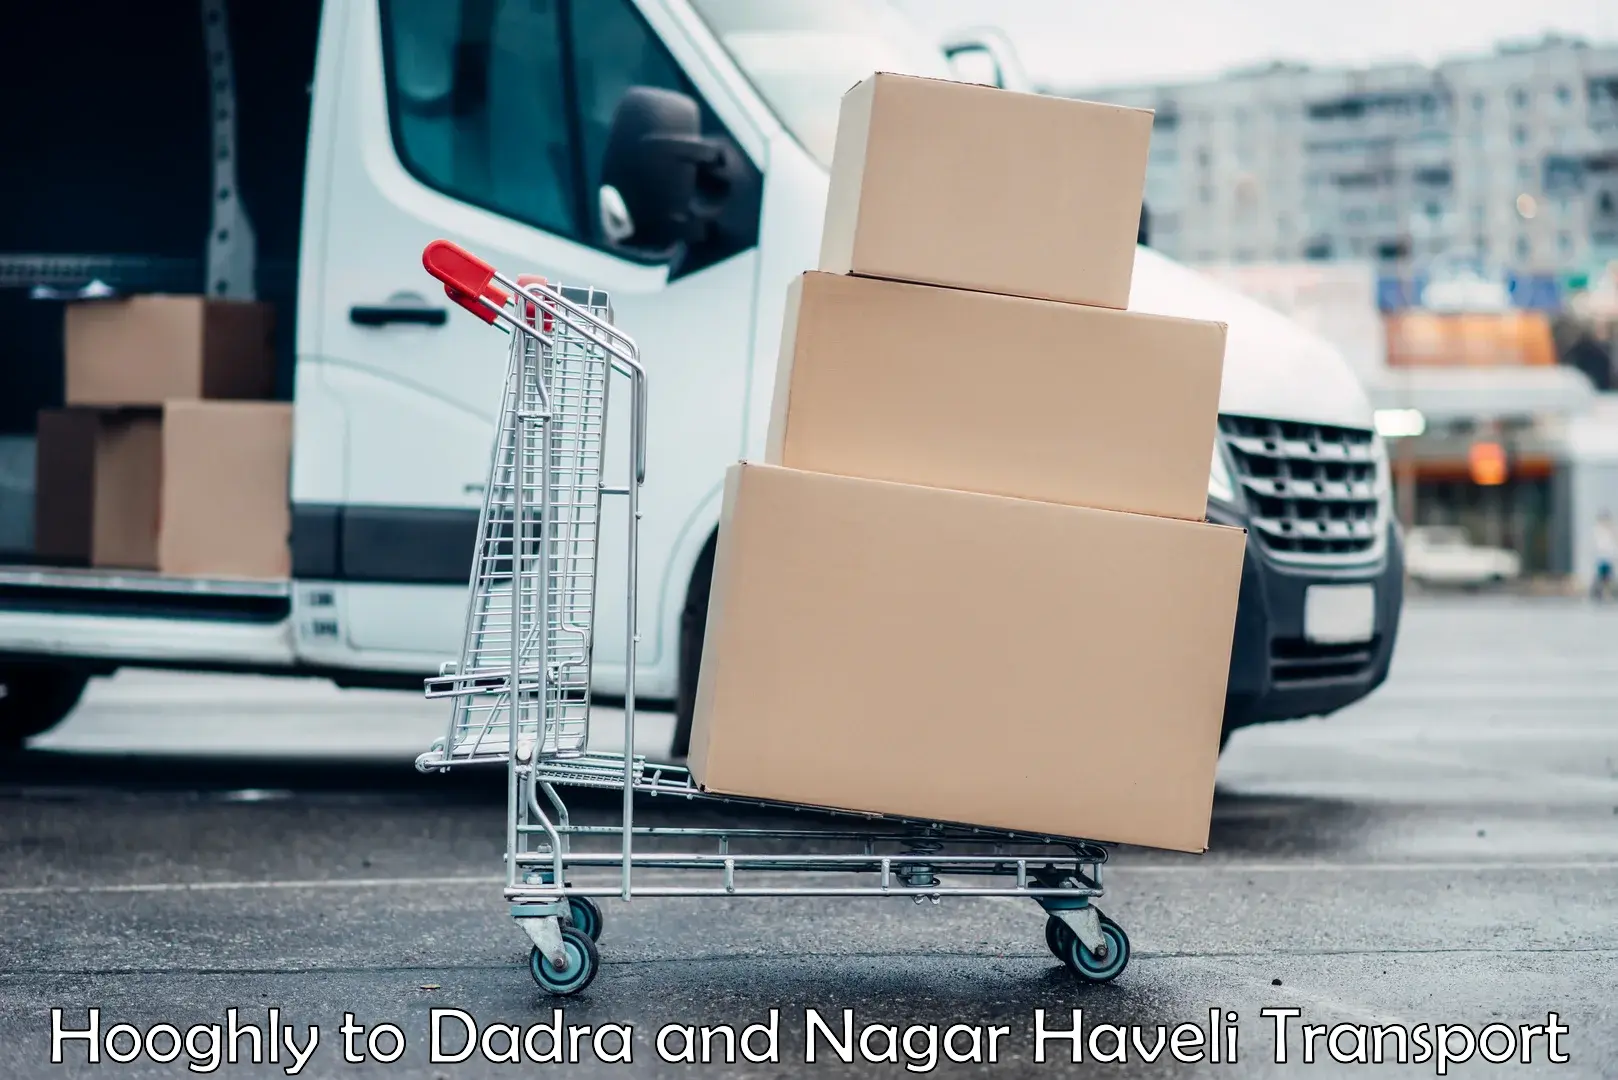 Express transport services Hooghly to Dadra and Nagar Haveli